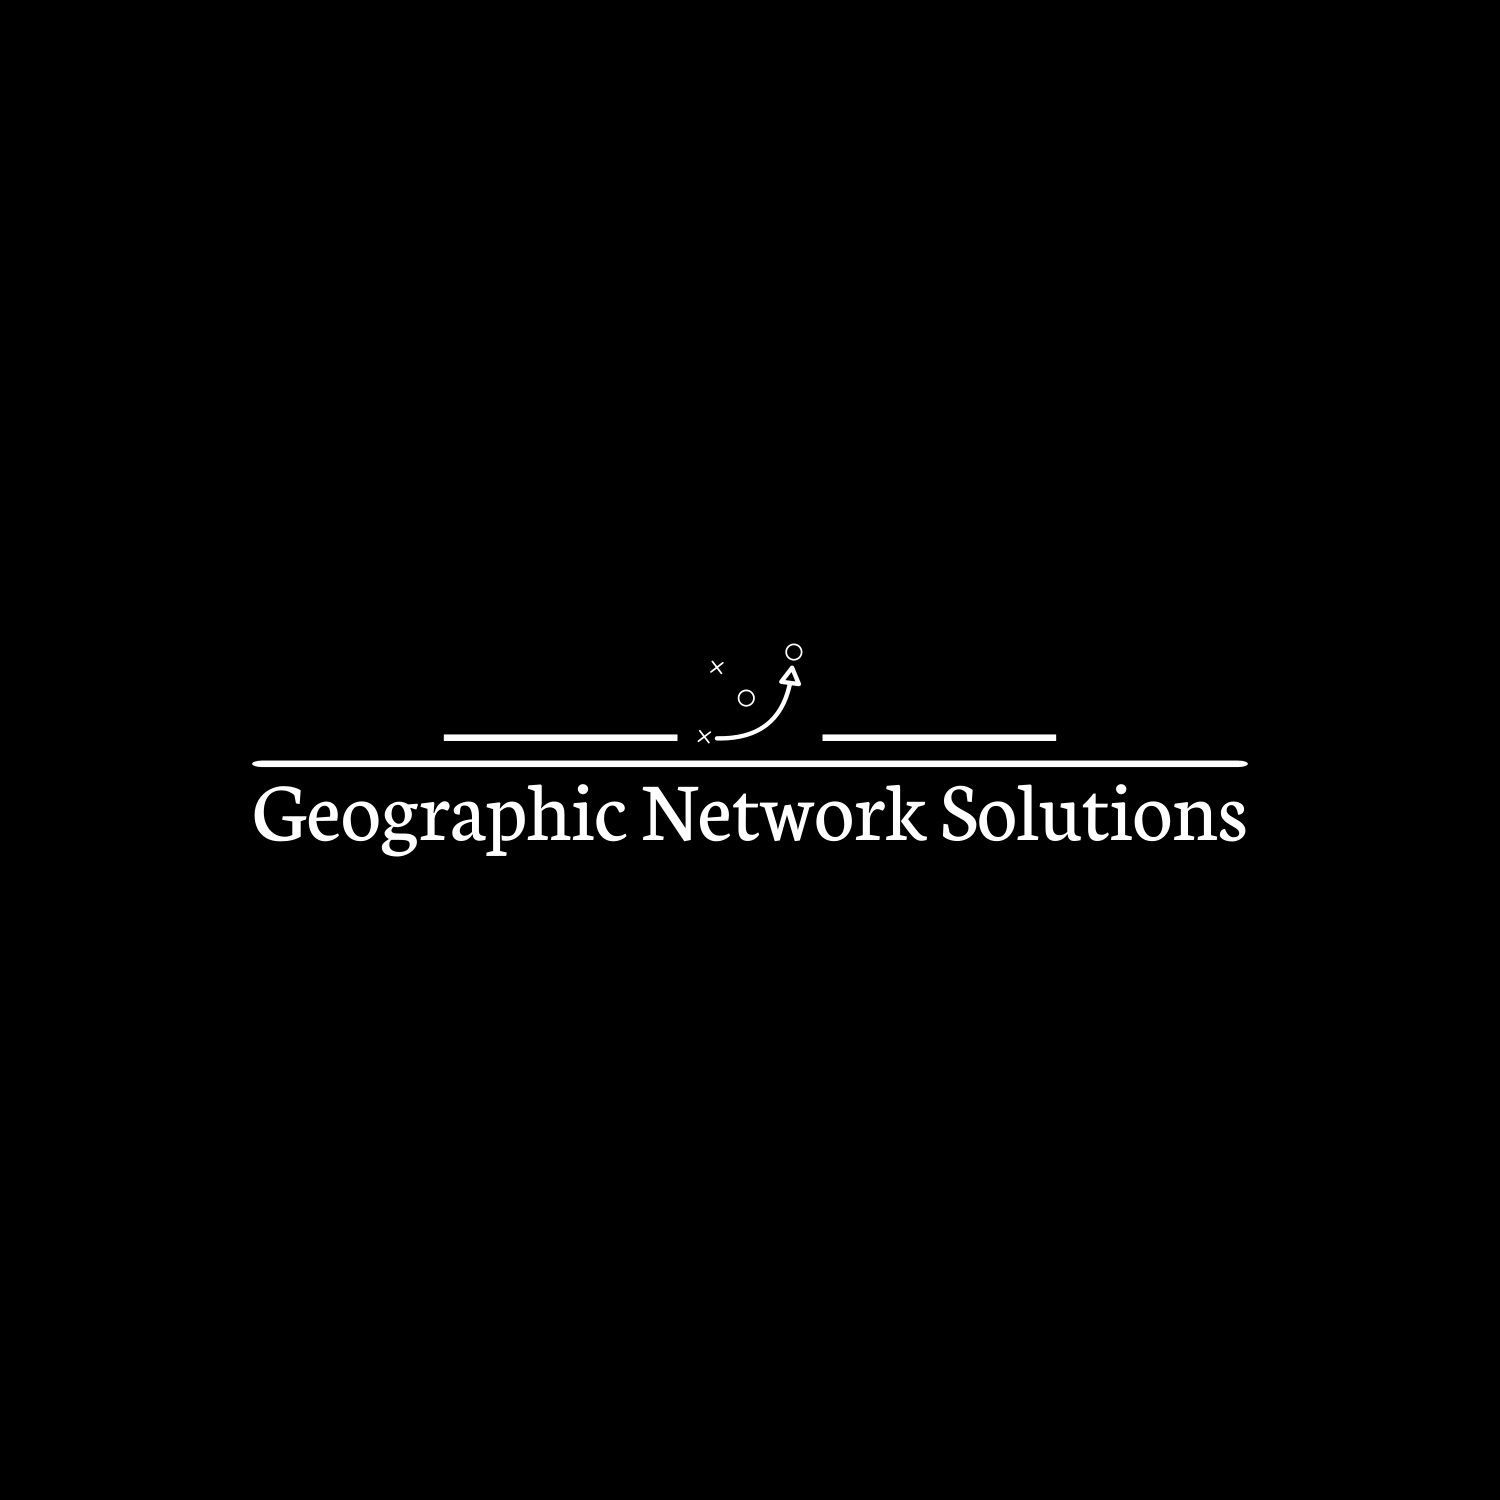 Geographic Network Solutions